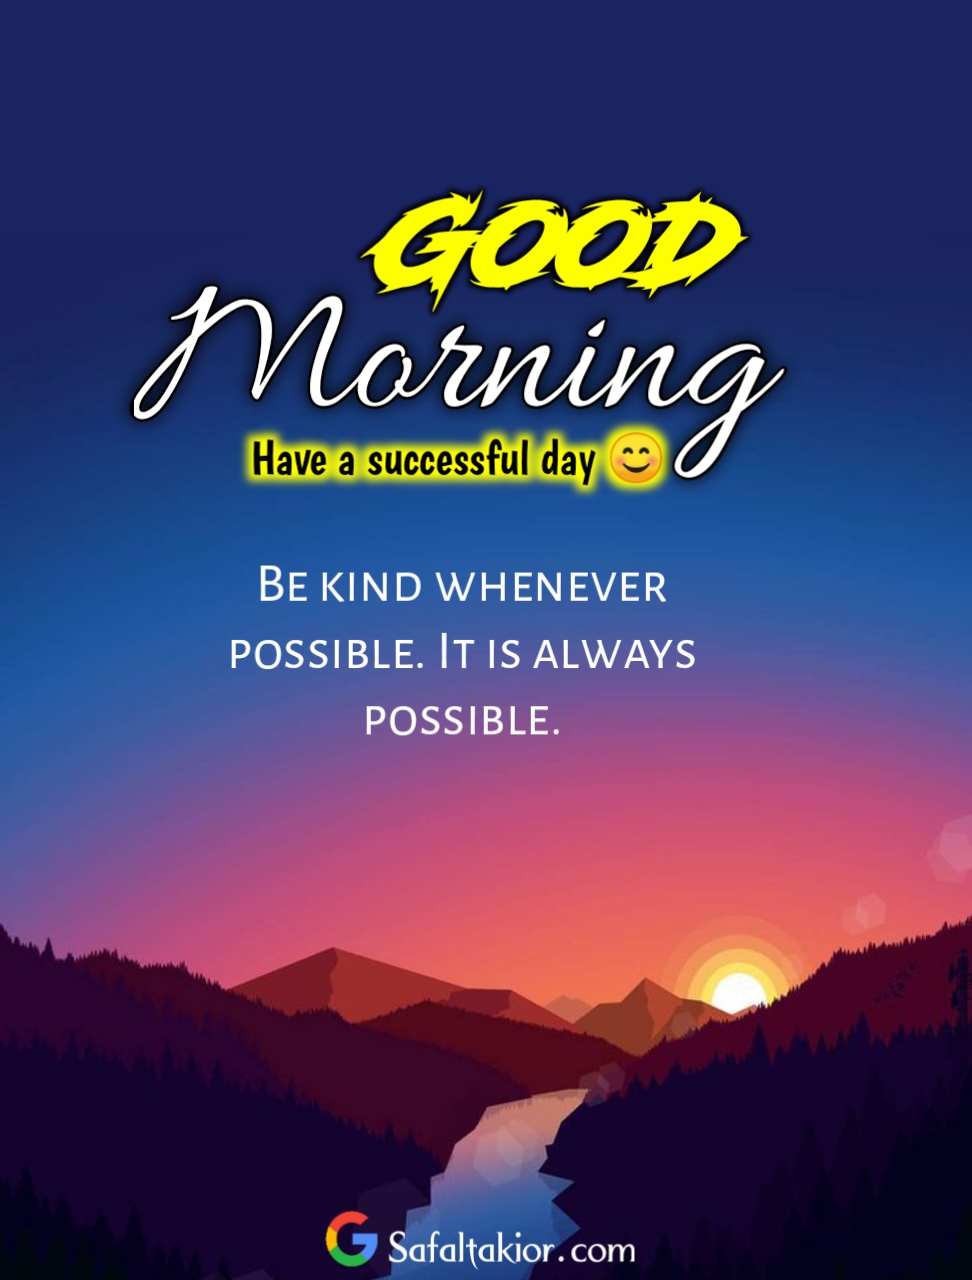 good morning images new positive word